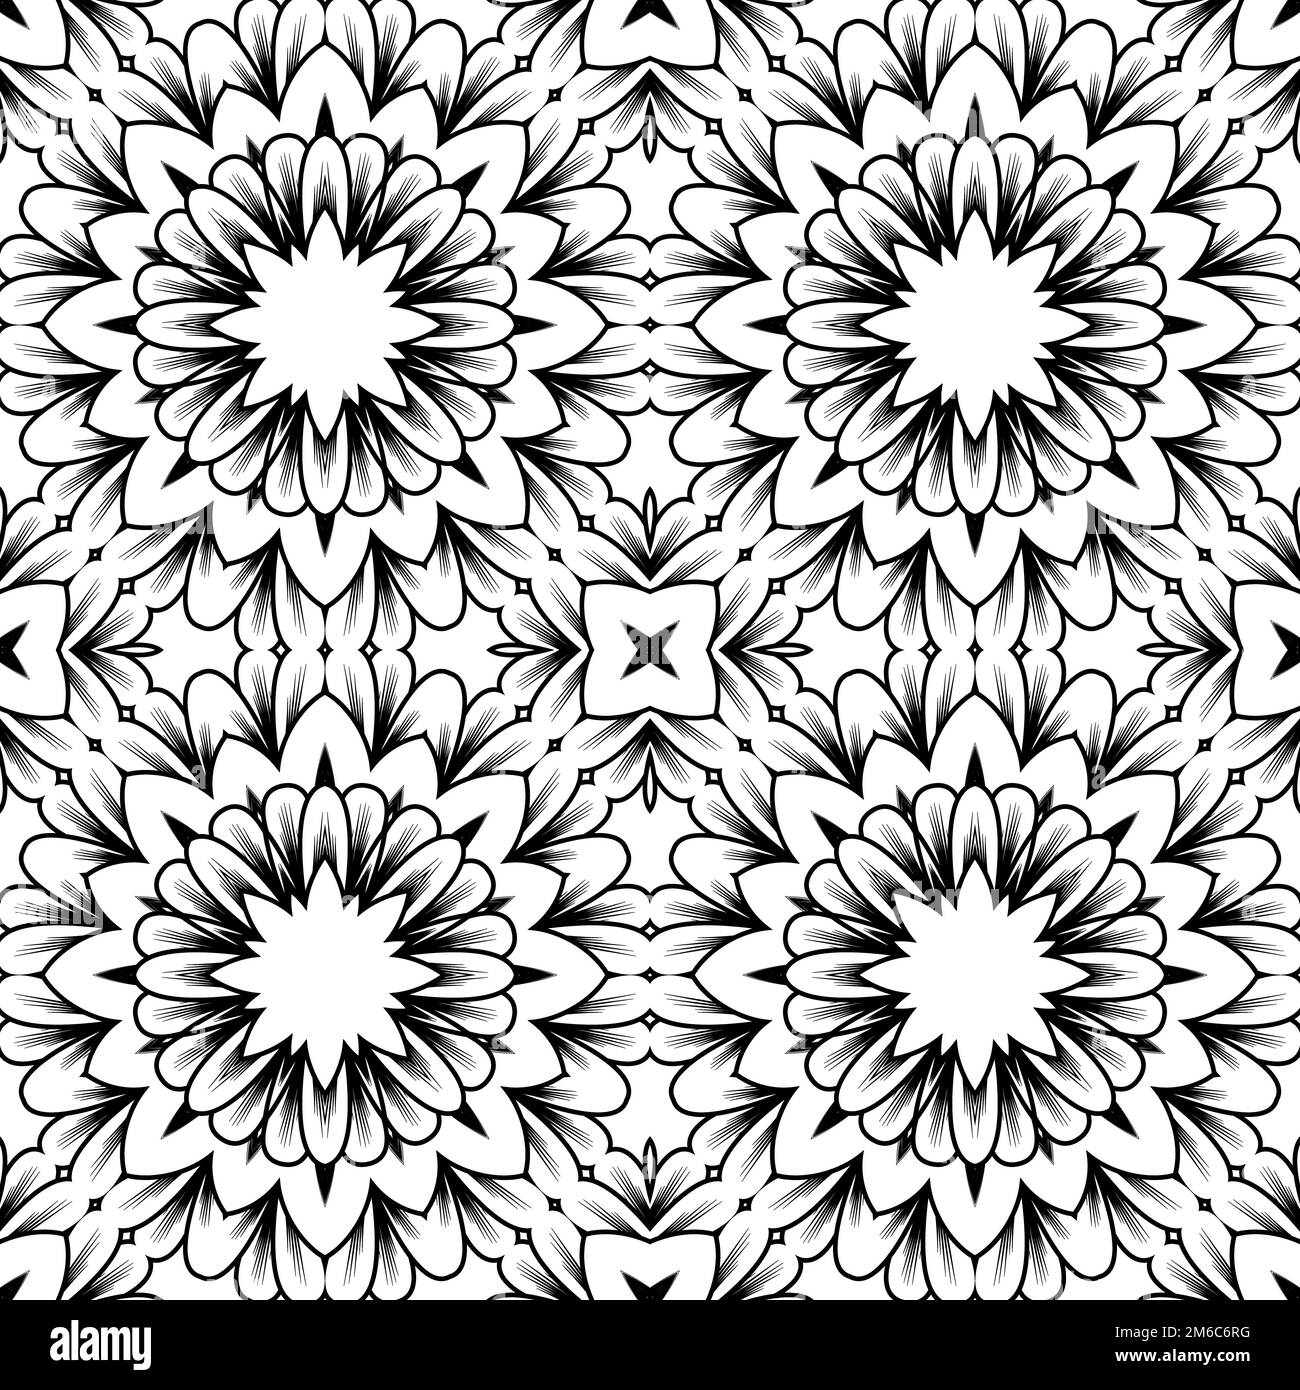 Seamless tileable background pattern Stock Photo